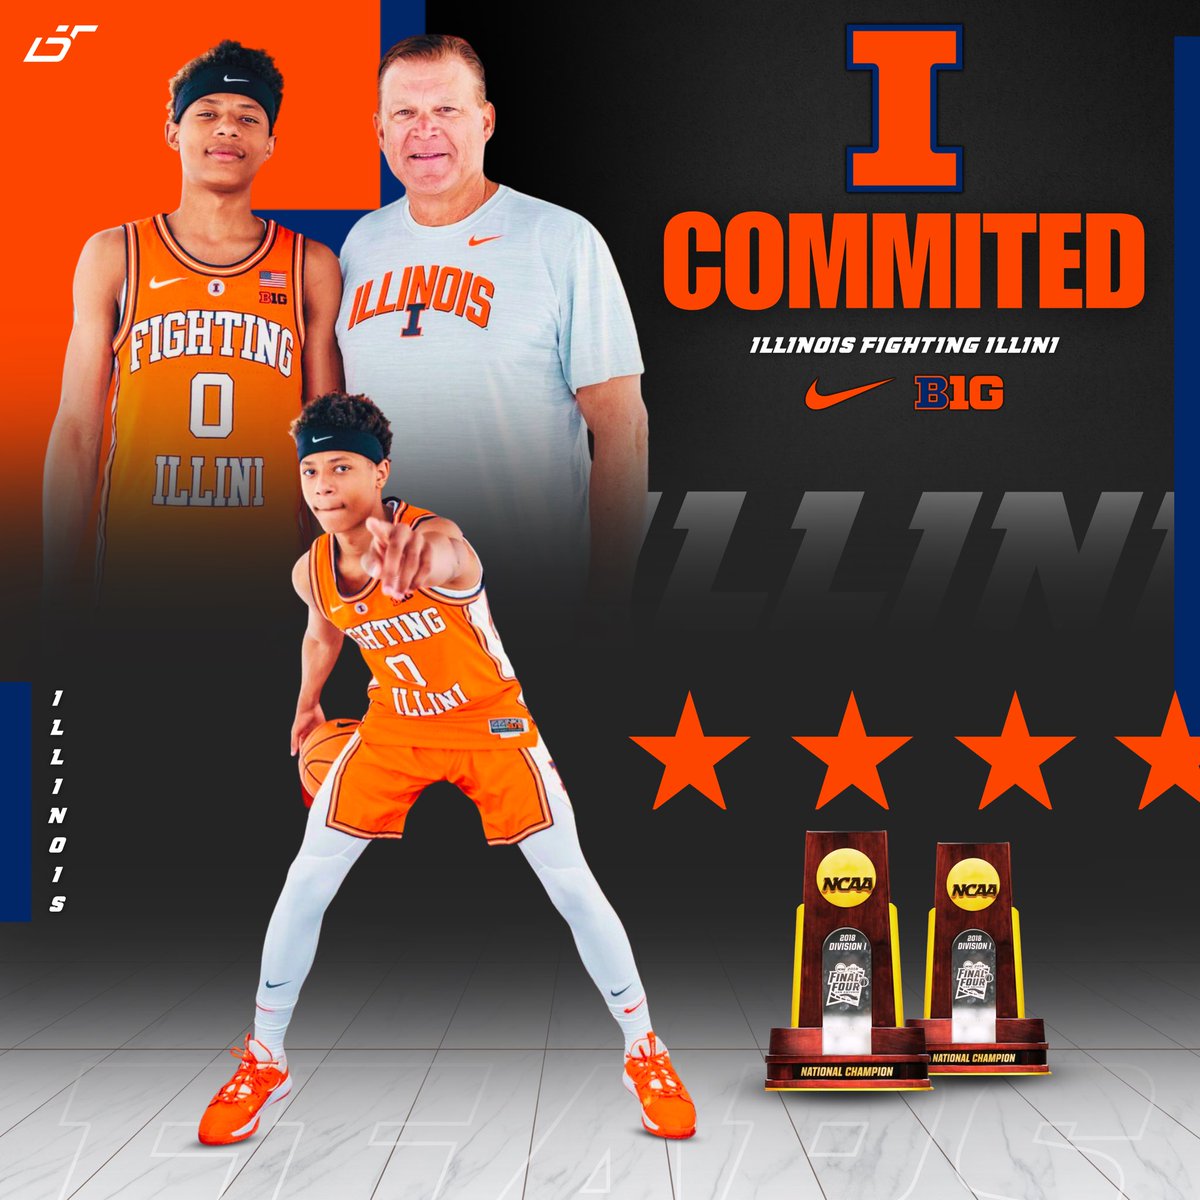 Jeremiah Fears has committed to Illinois! He chose them over Providence, Ole Miss, Michigan, Kansas, and others. The 2024 6’3 guard is ranked as a 4⭐️ and 44th overall via 247 Sports. @jeremiahfears2